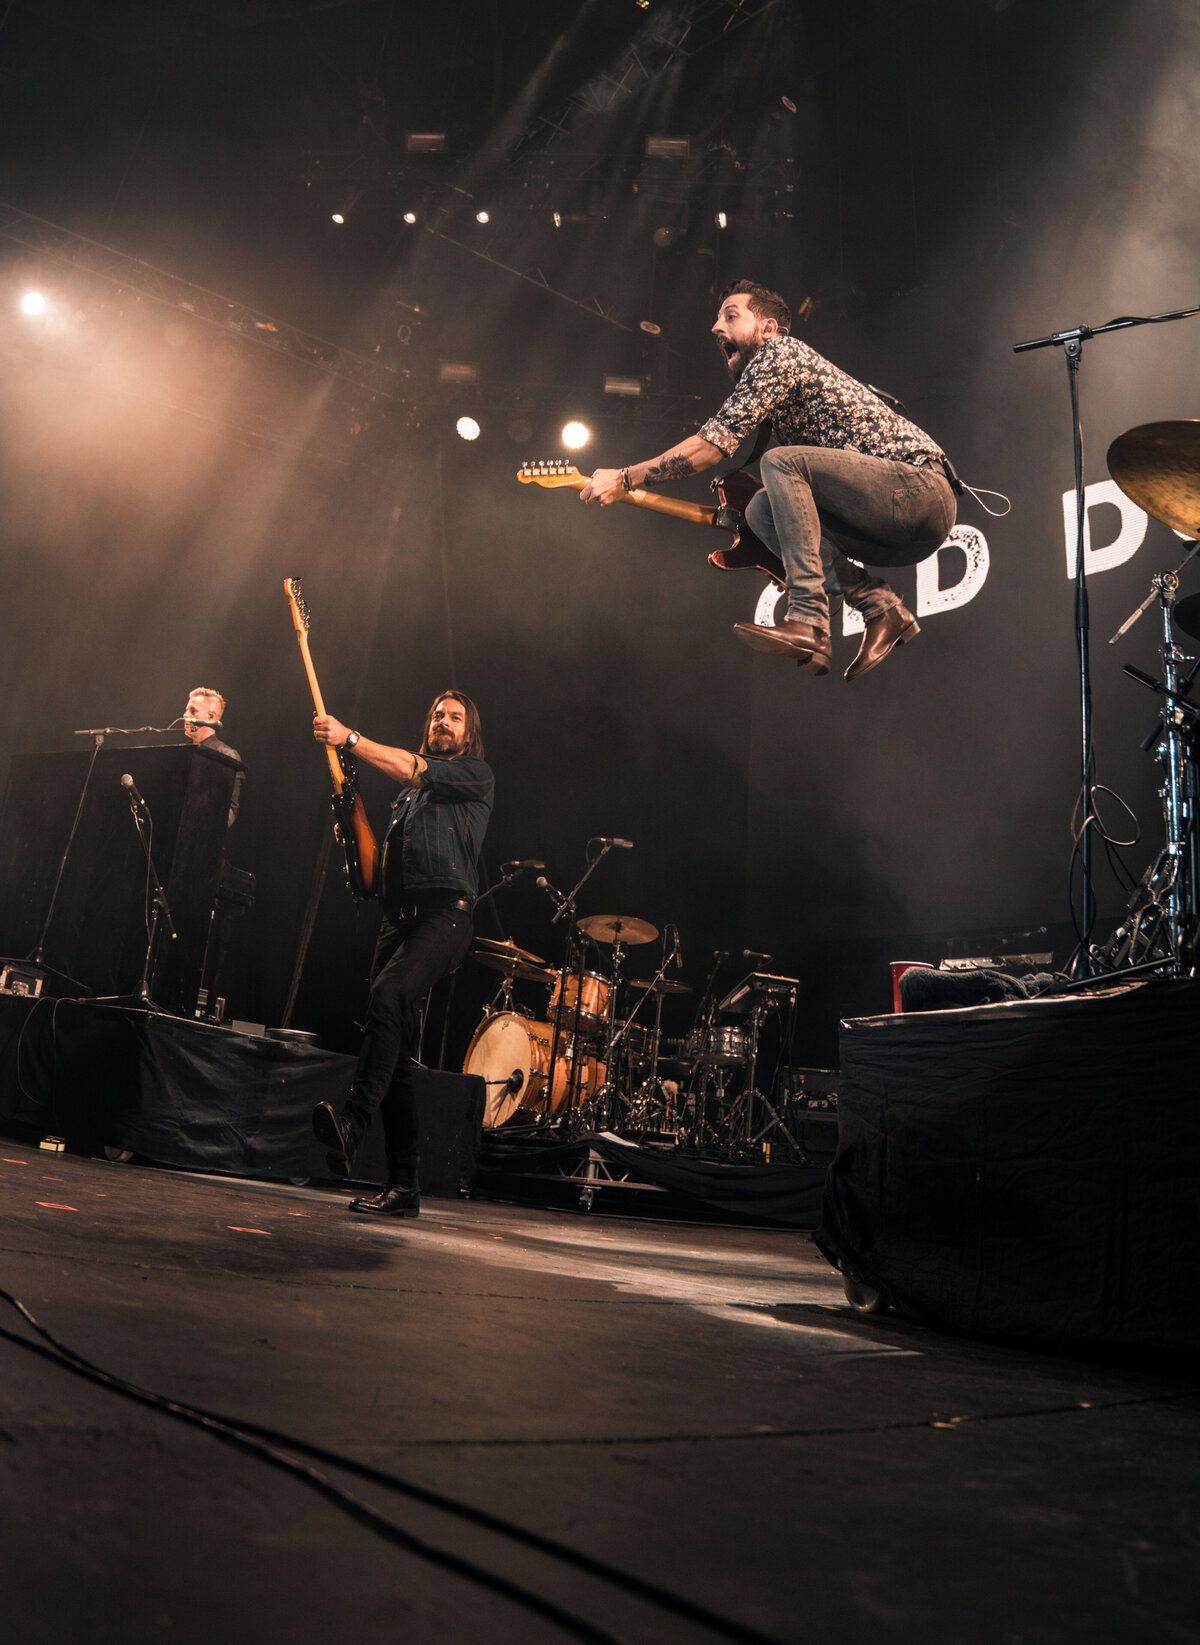 Old Dominion stage jump during concert